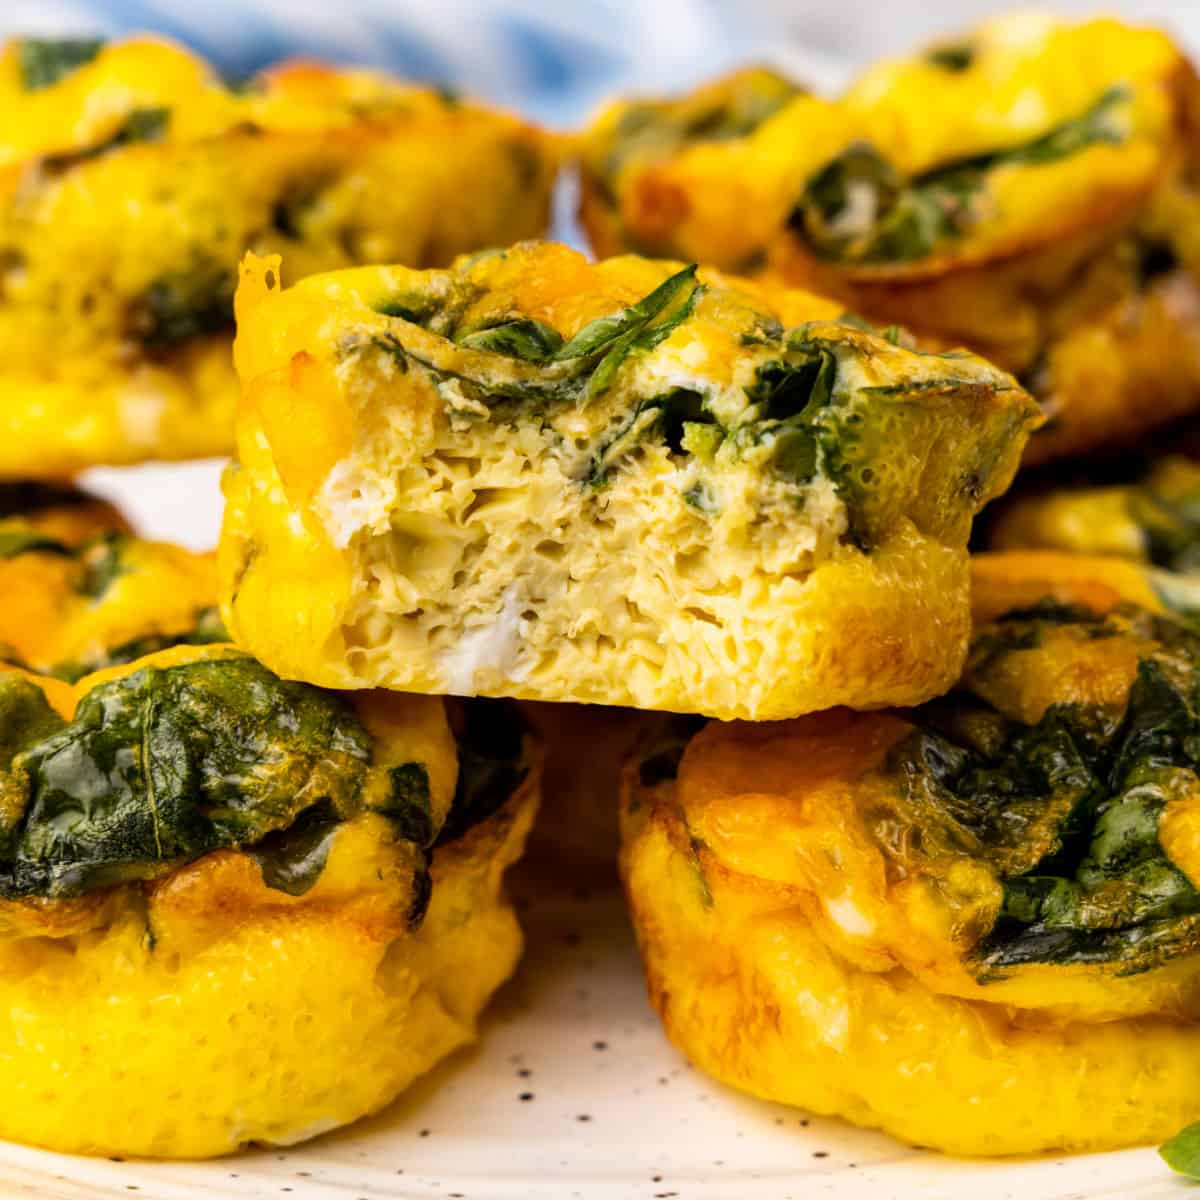 https://realhousemoms.com/wp-content/uploads/Spinach-and-Cheese-Breakfast-Egg-Bites-RECIPE-CARD.jpg